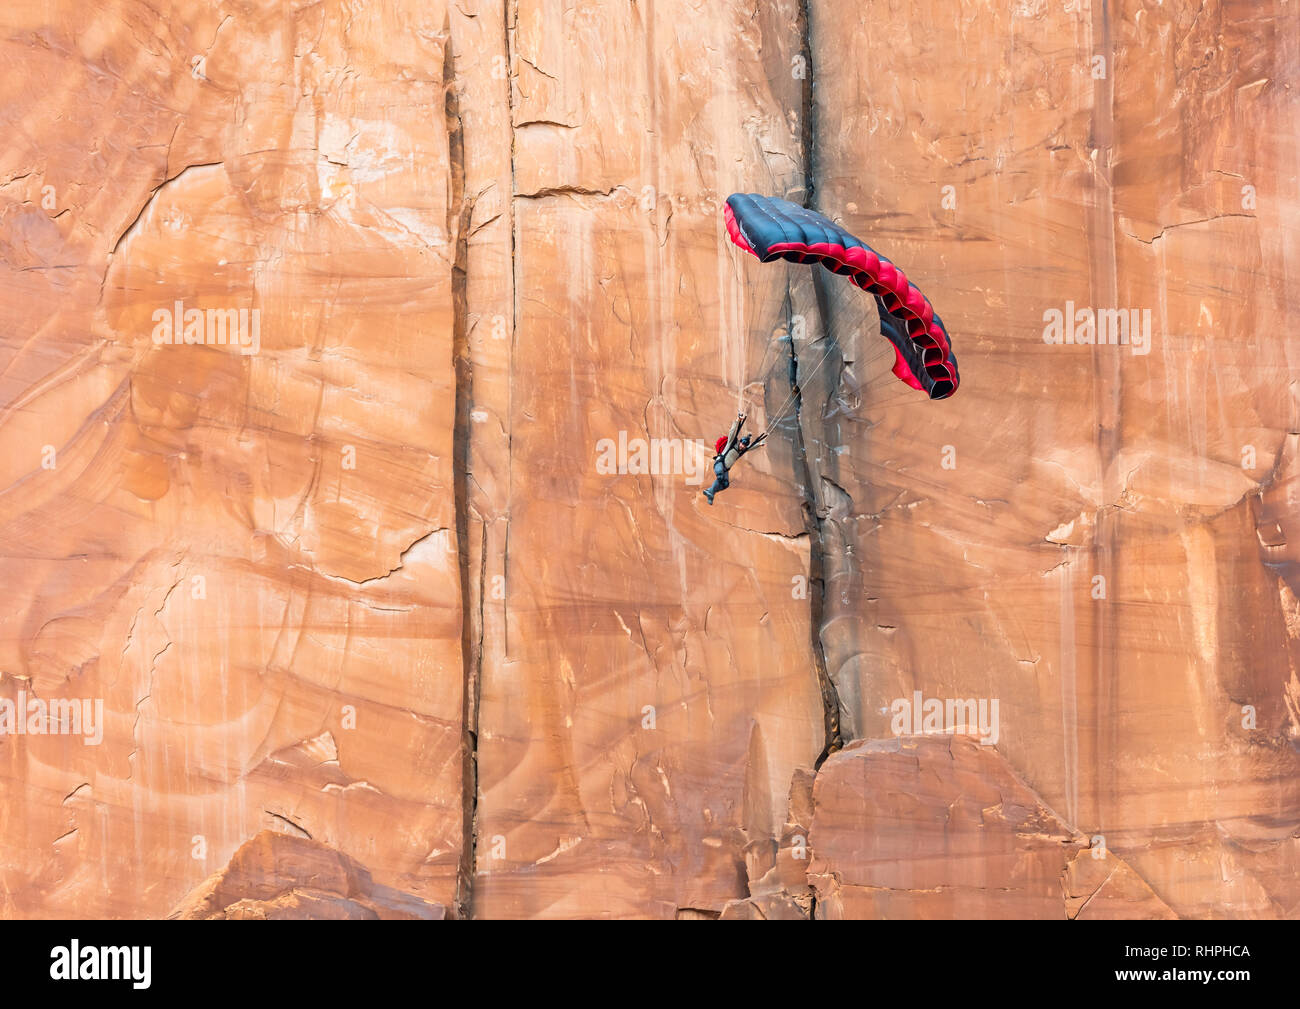 Aaron Stuyvenberg jumps from an exit point called Tombstone near Moab Utah Stock Photo